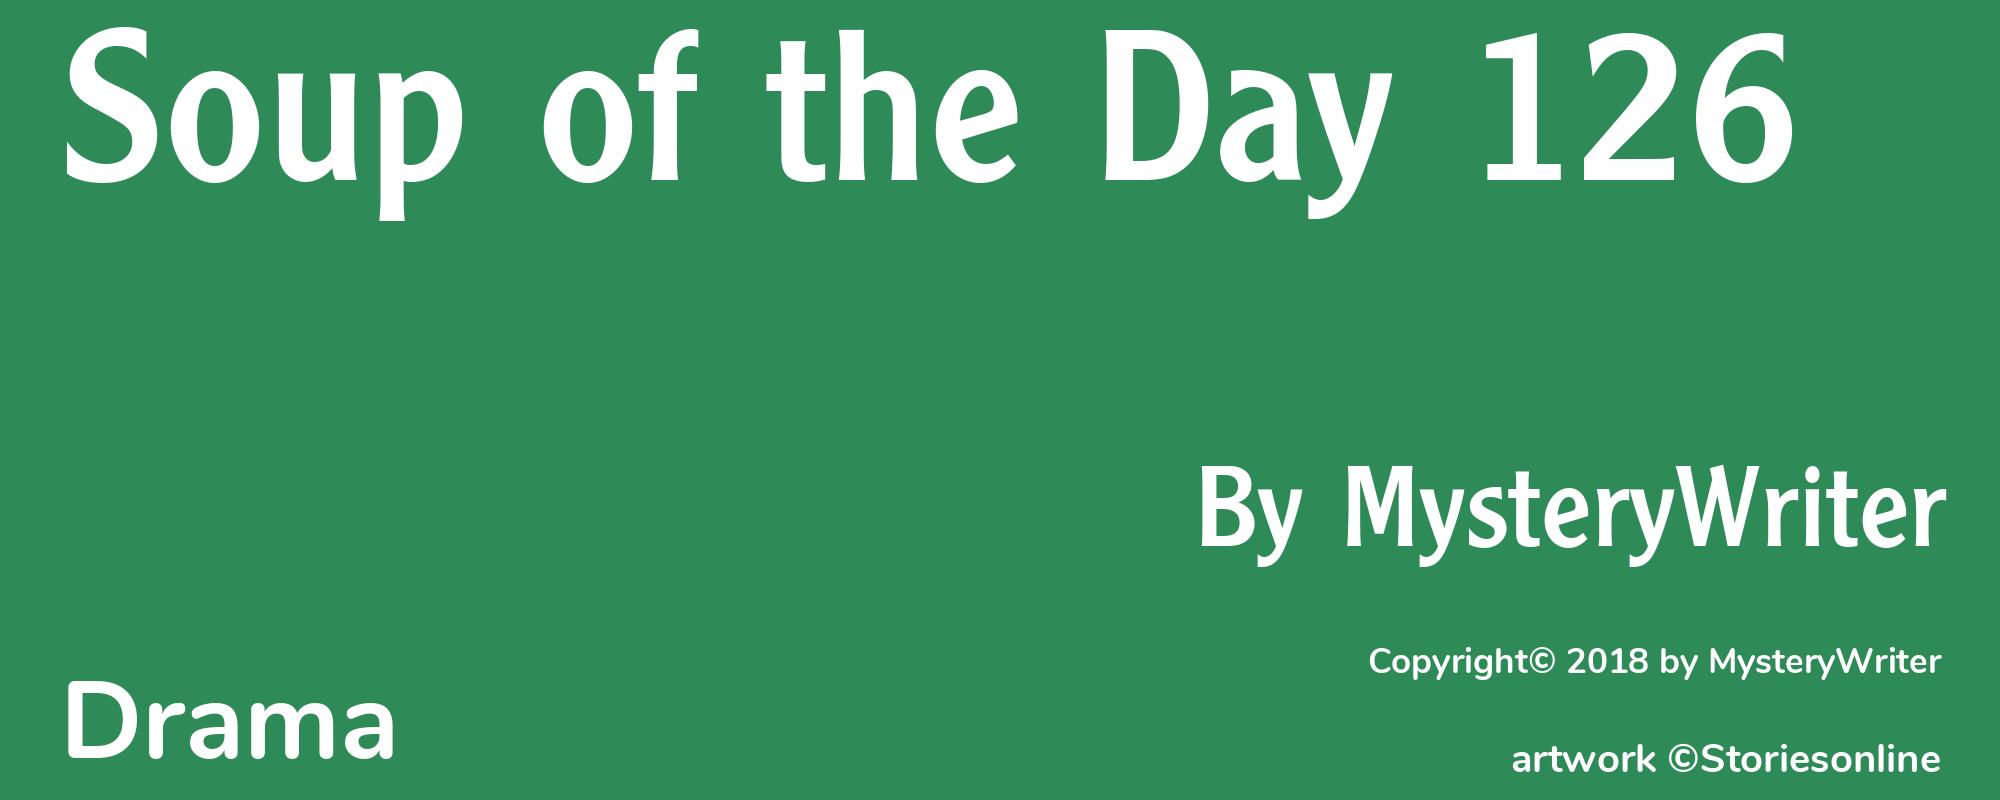 Soup of the Day 126 - Cover